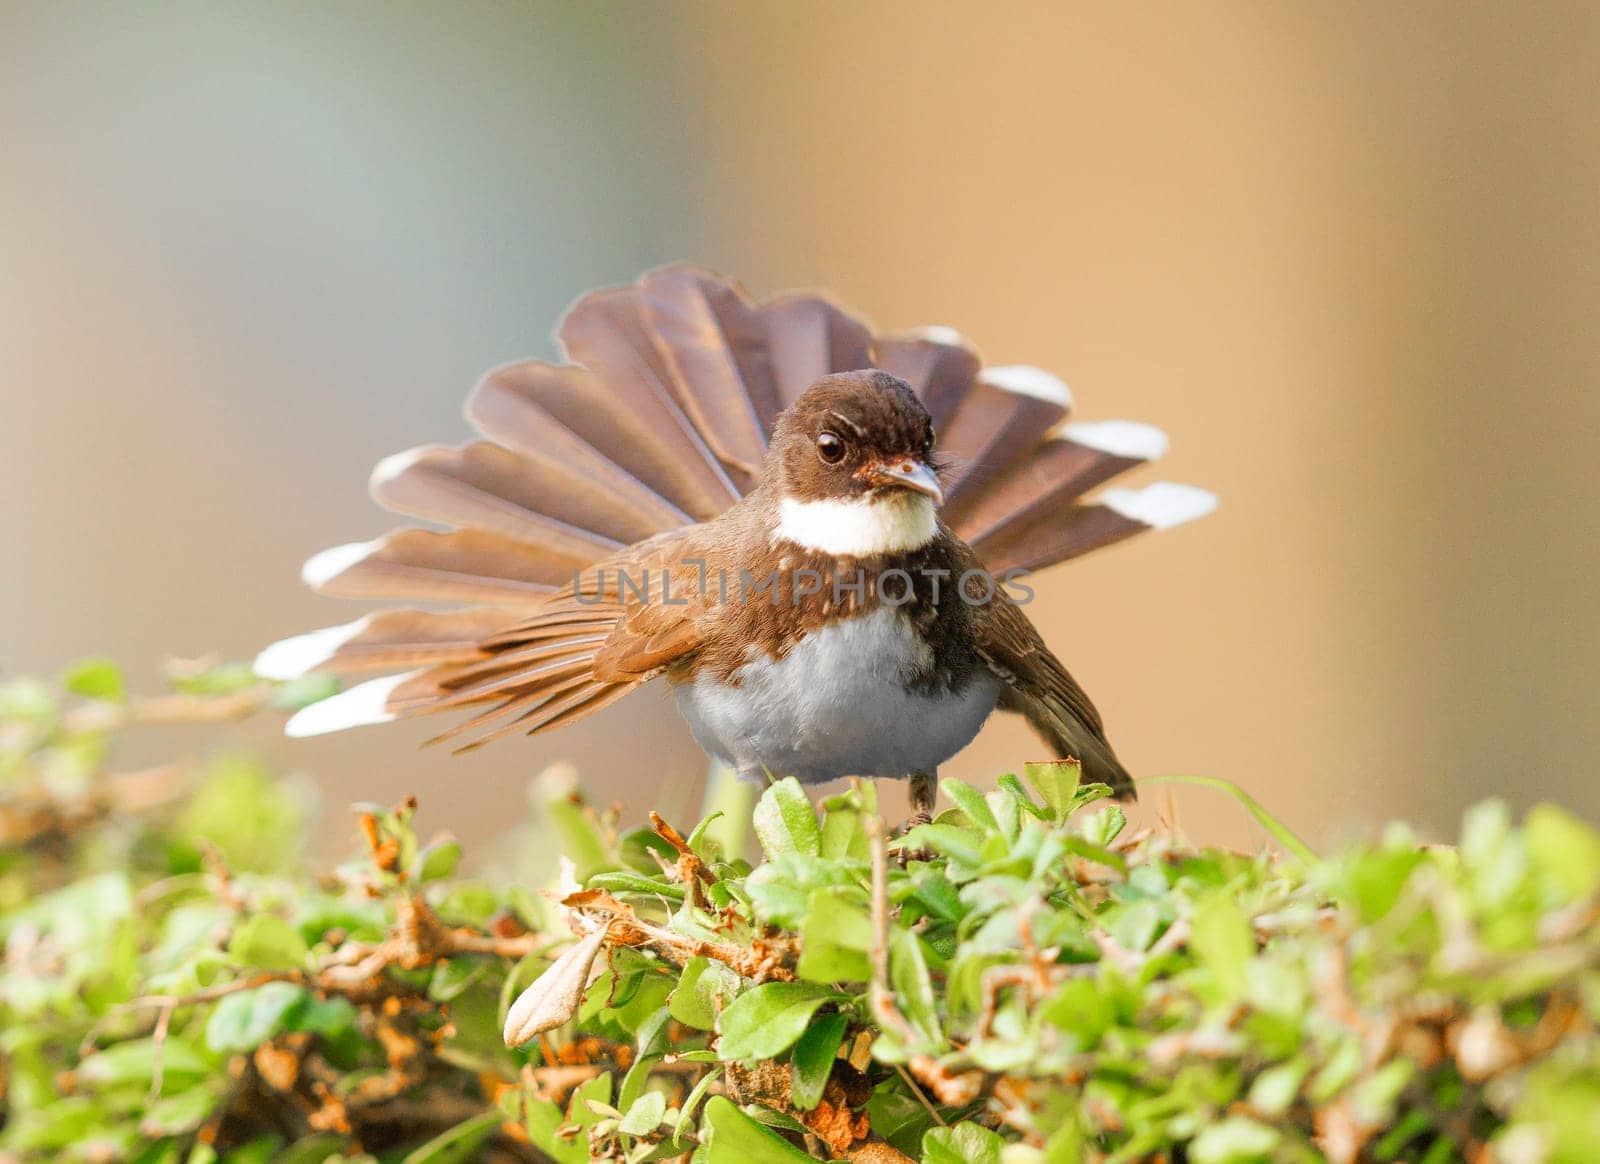 Malaysian Pied Fantail foraging in the gardens by Rajh_Photography